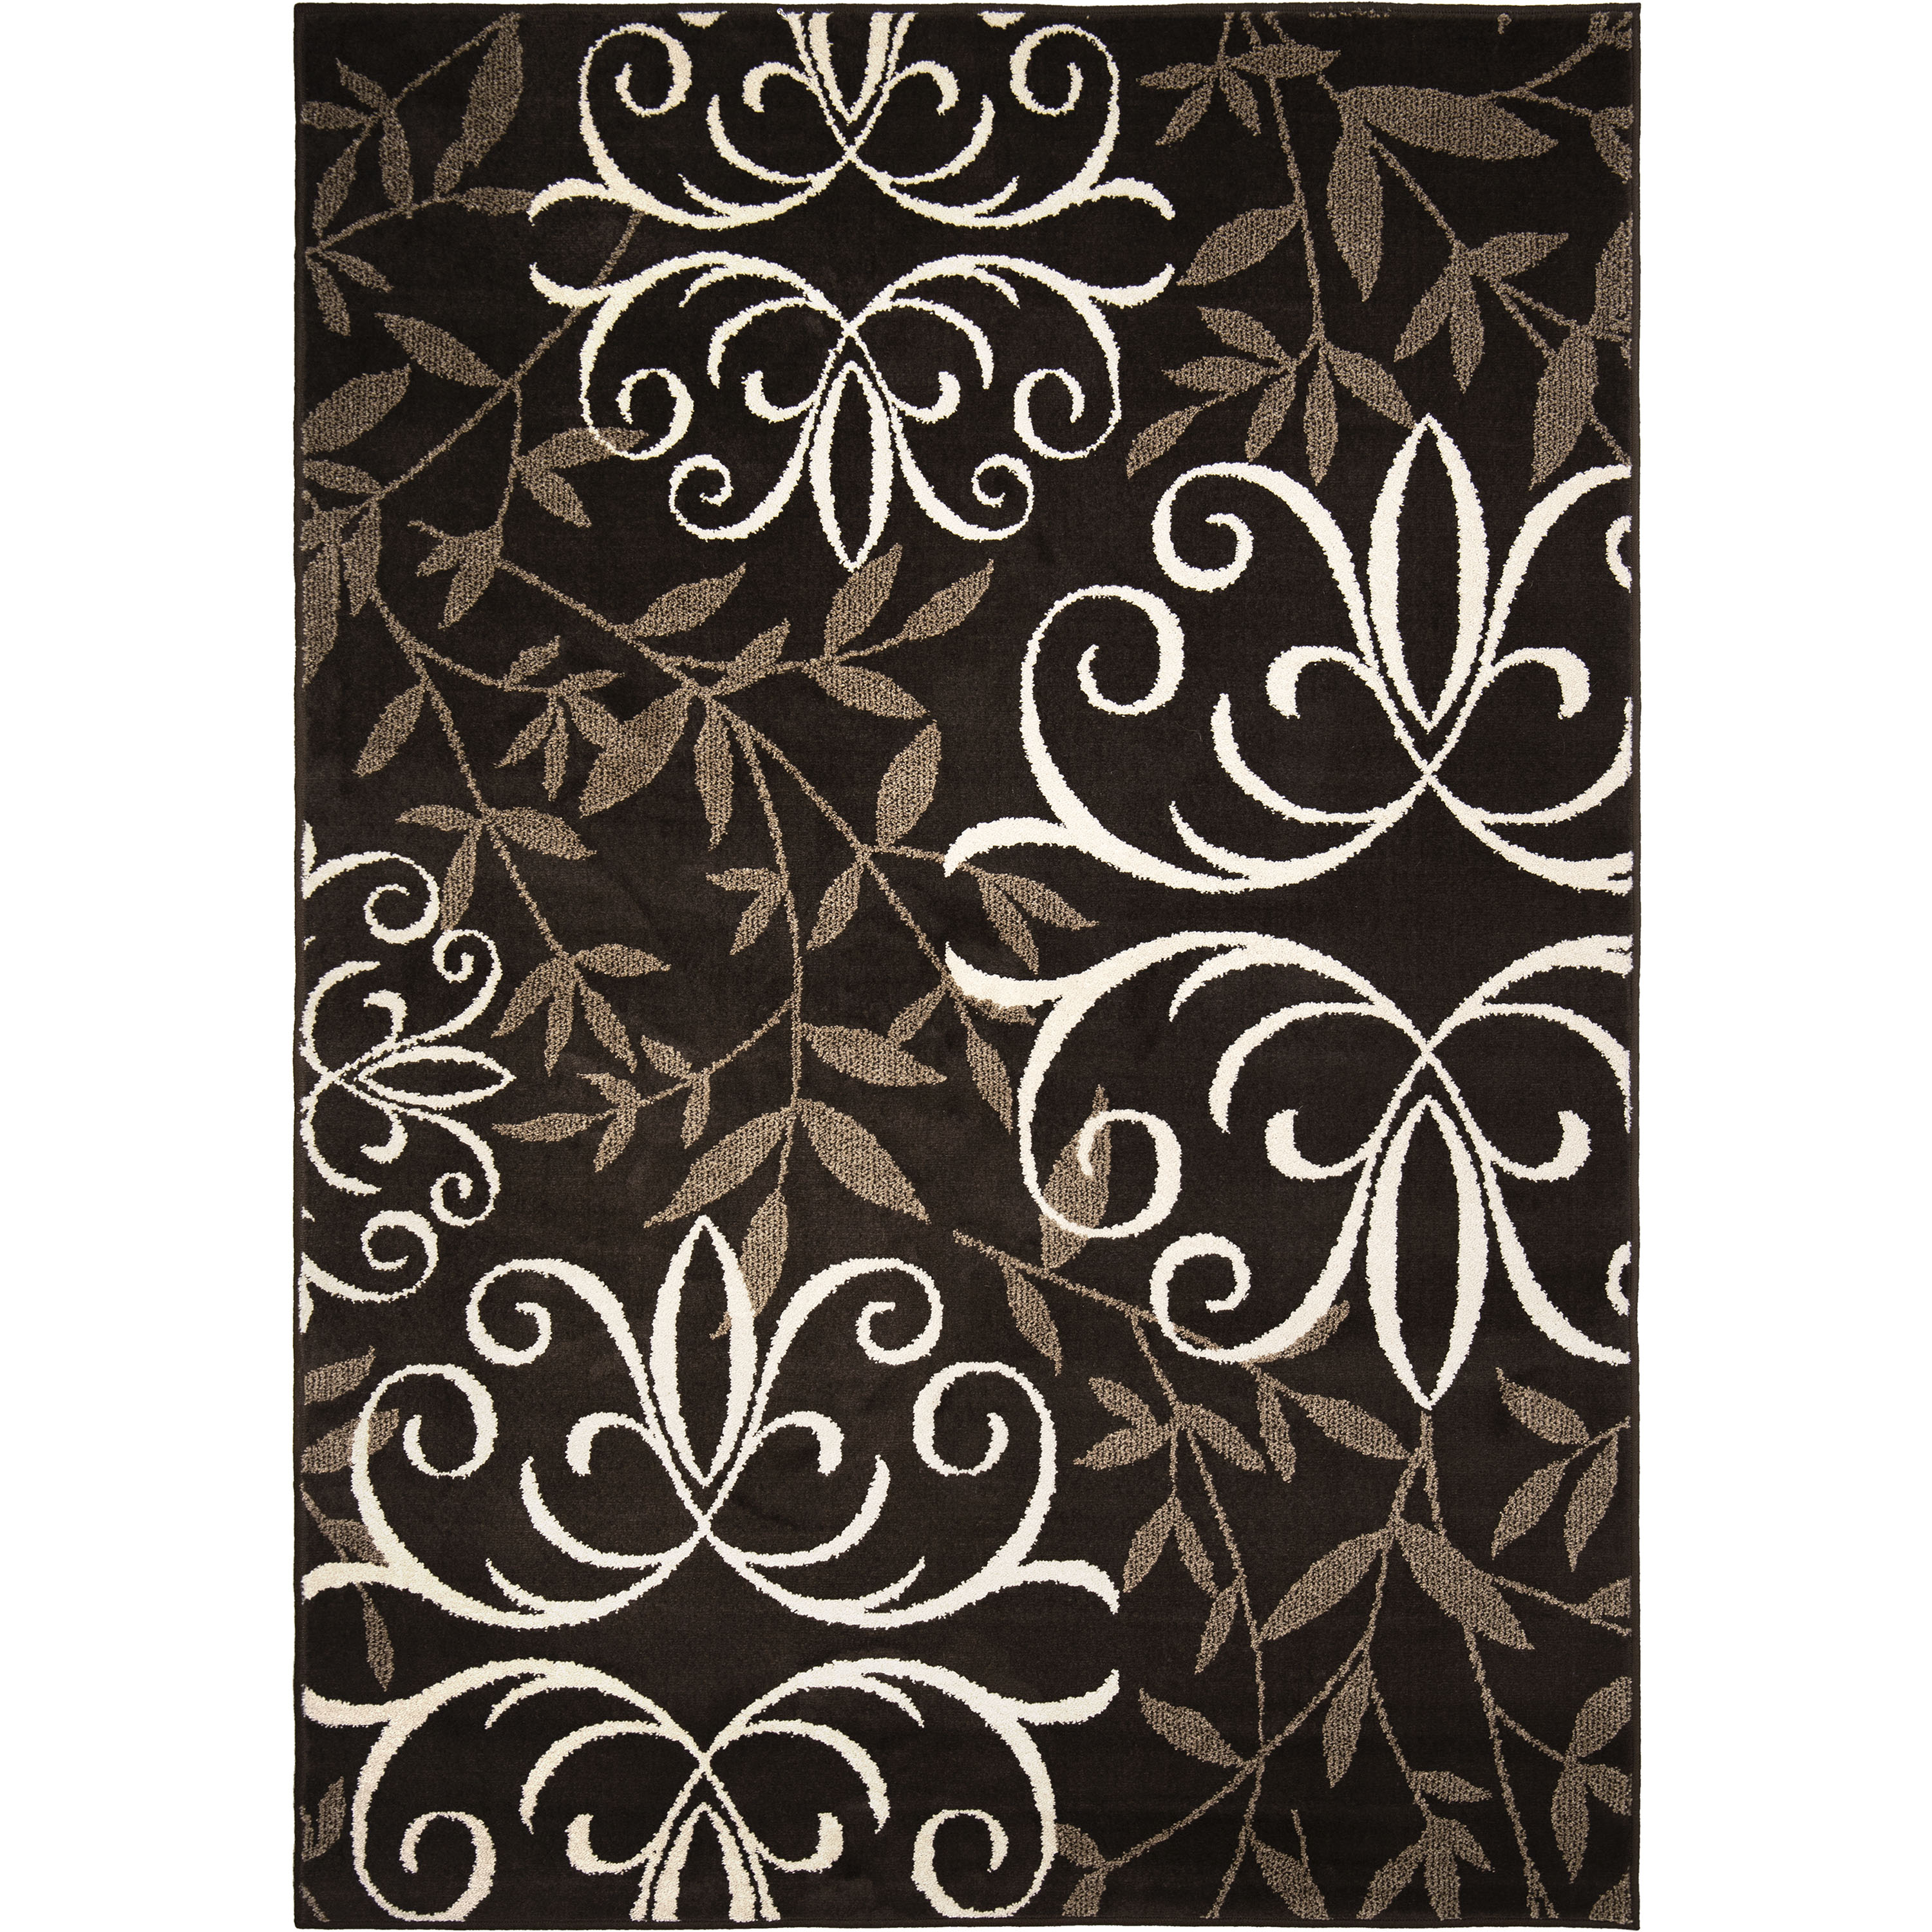 Better Homes & Gardens Iron Fleur Area Rug, Brown, 7'6" x 9'6" - image 4 of 9